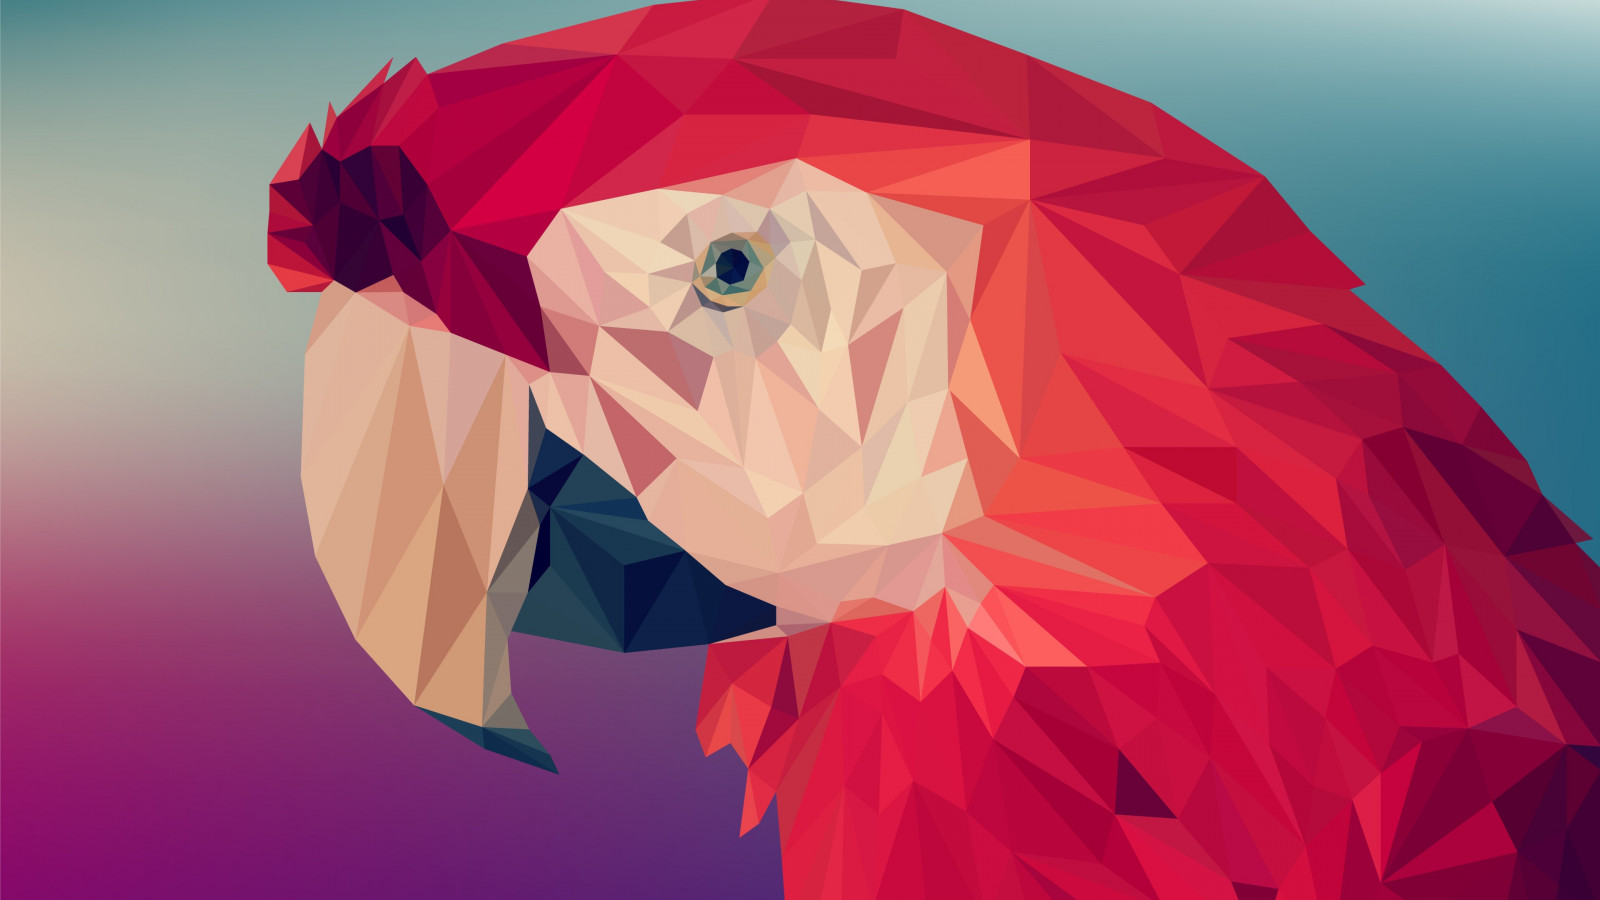 Low poly art: Red parrot wallpaper 1600x900